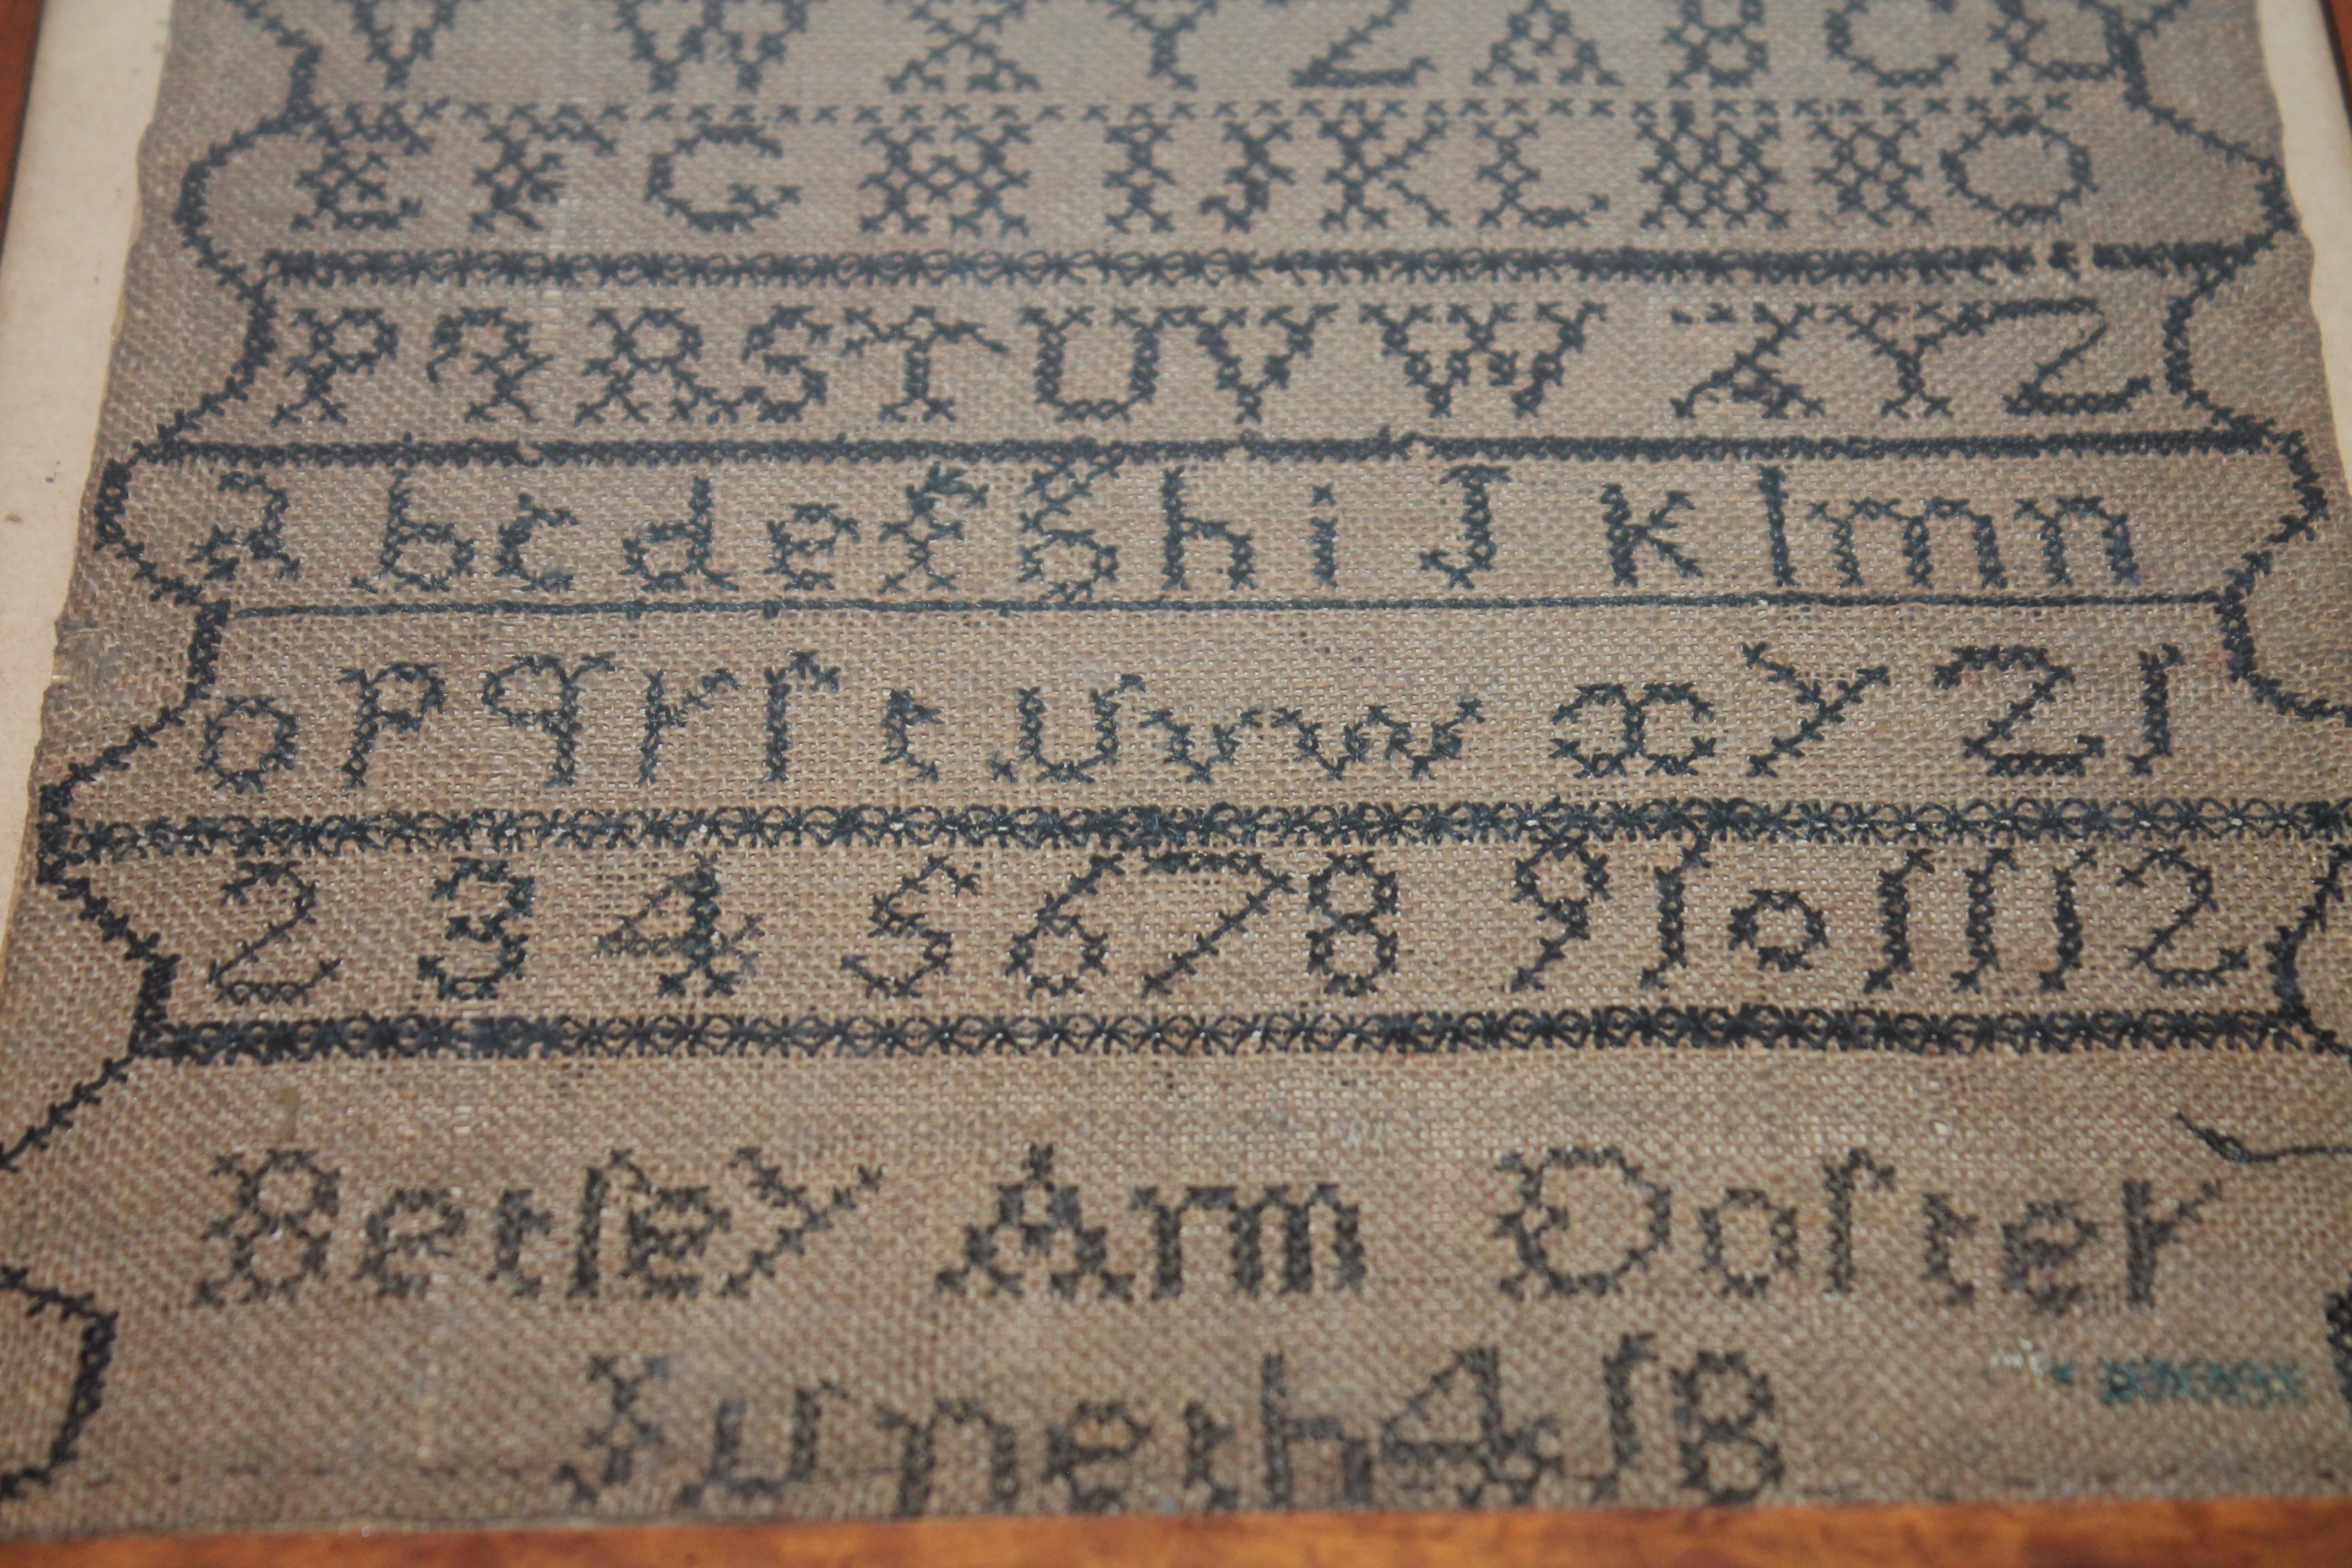 This fine school girl sampler was found in a collection in Philadelphia, Pennsylvania and is dated 1804 at the very bottom of the sampler. It was made by Beriey Ann Dorter ??? Hard to read.This was done on a handmade or woven homespun linen. It